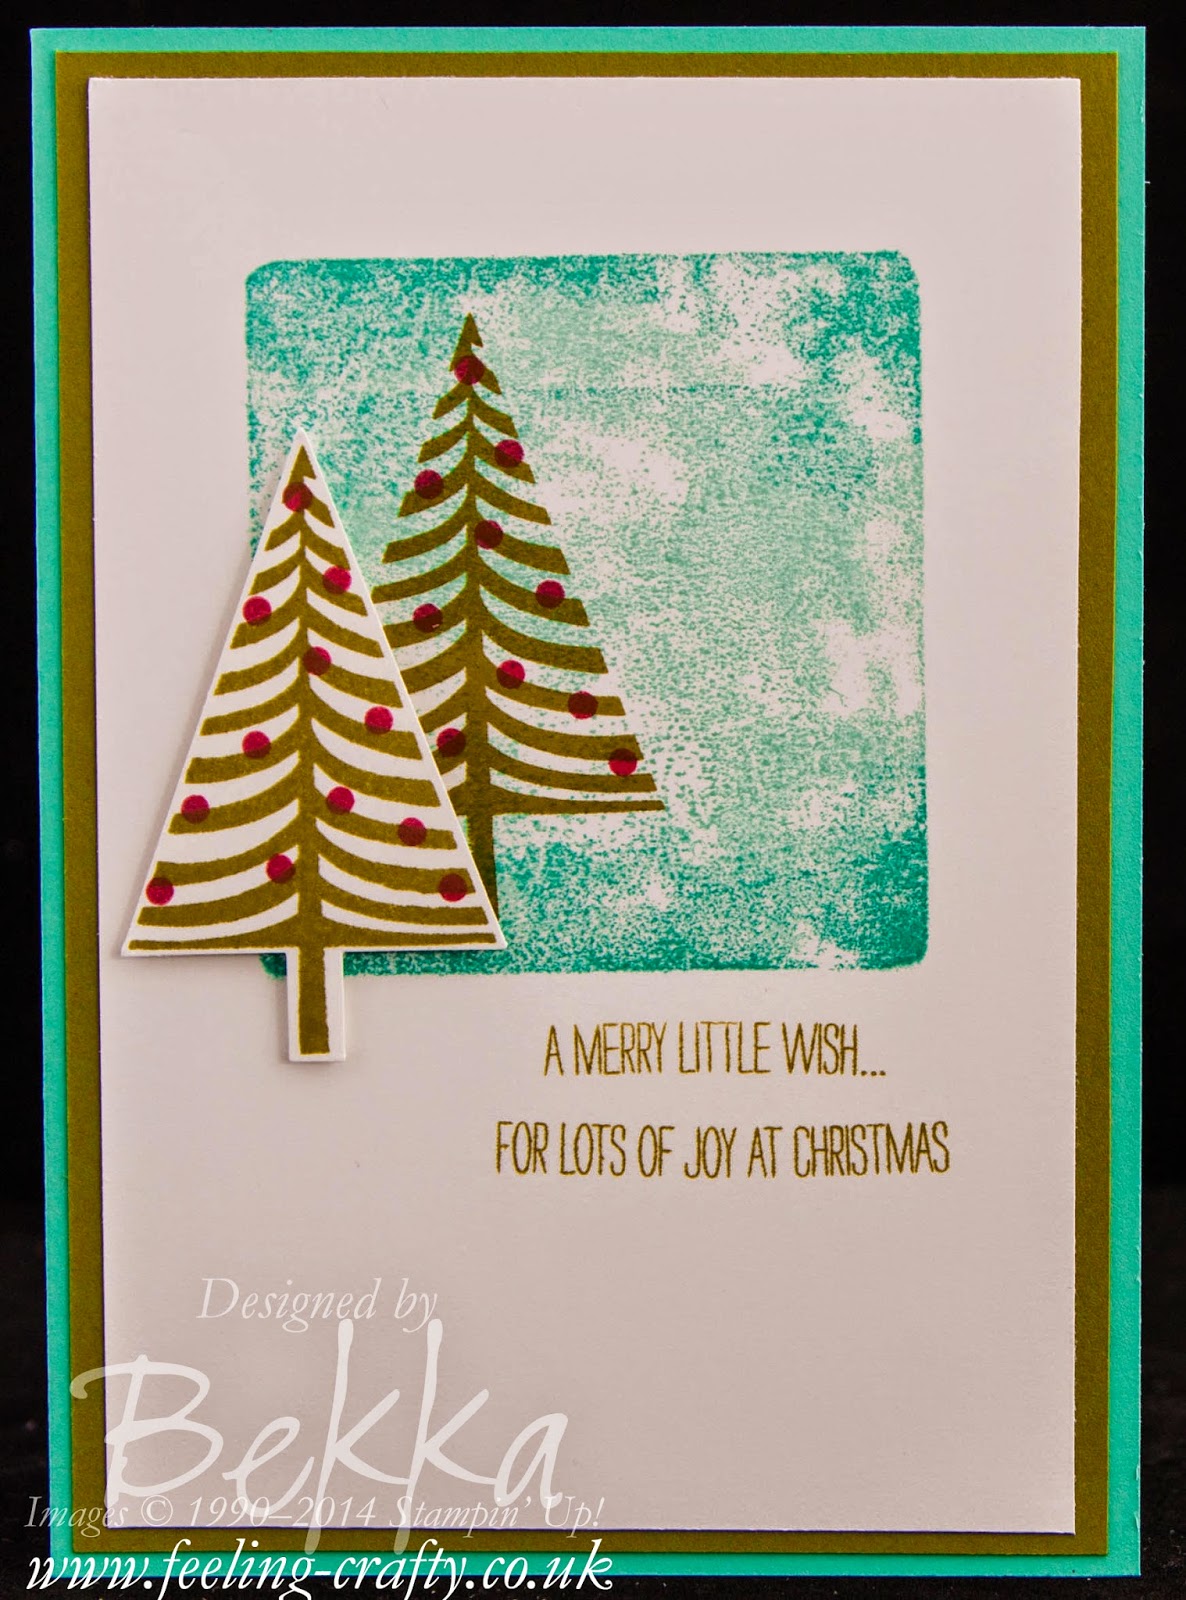 Festival of Trees Christmas Card by Stampin' Up! UK Independent Demonstrator Bekka Prideuaux - check her blog for lots of cute ideas